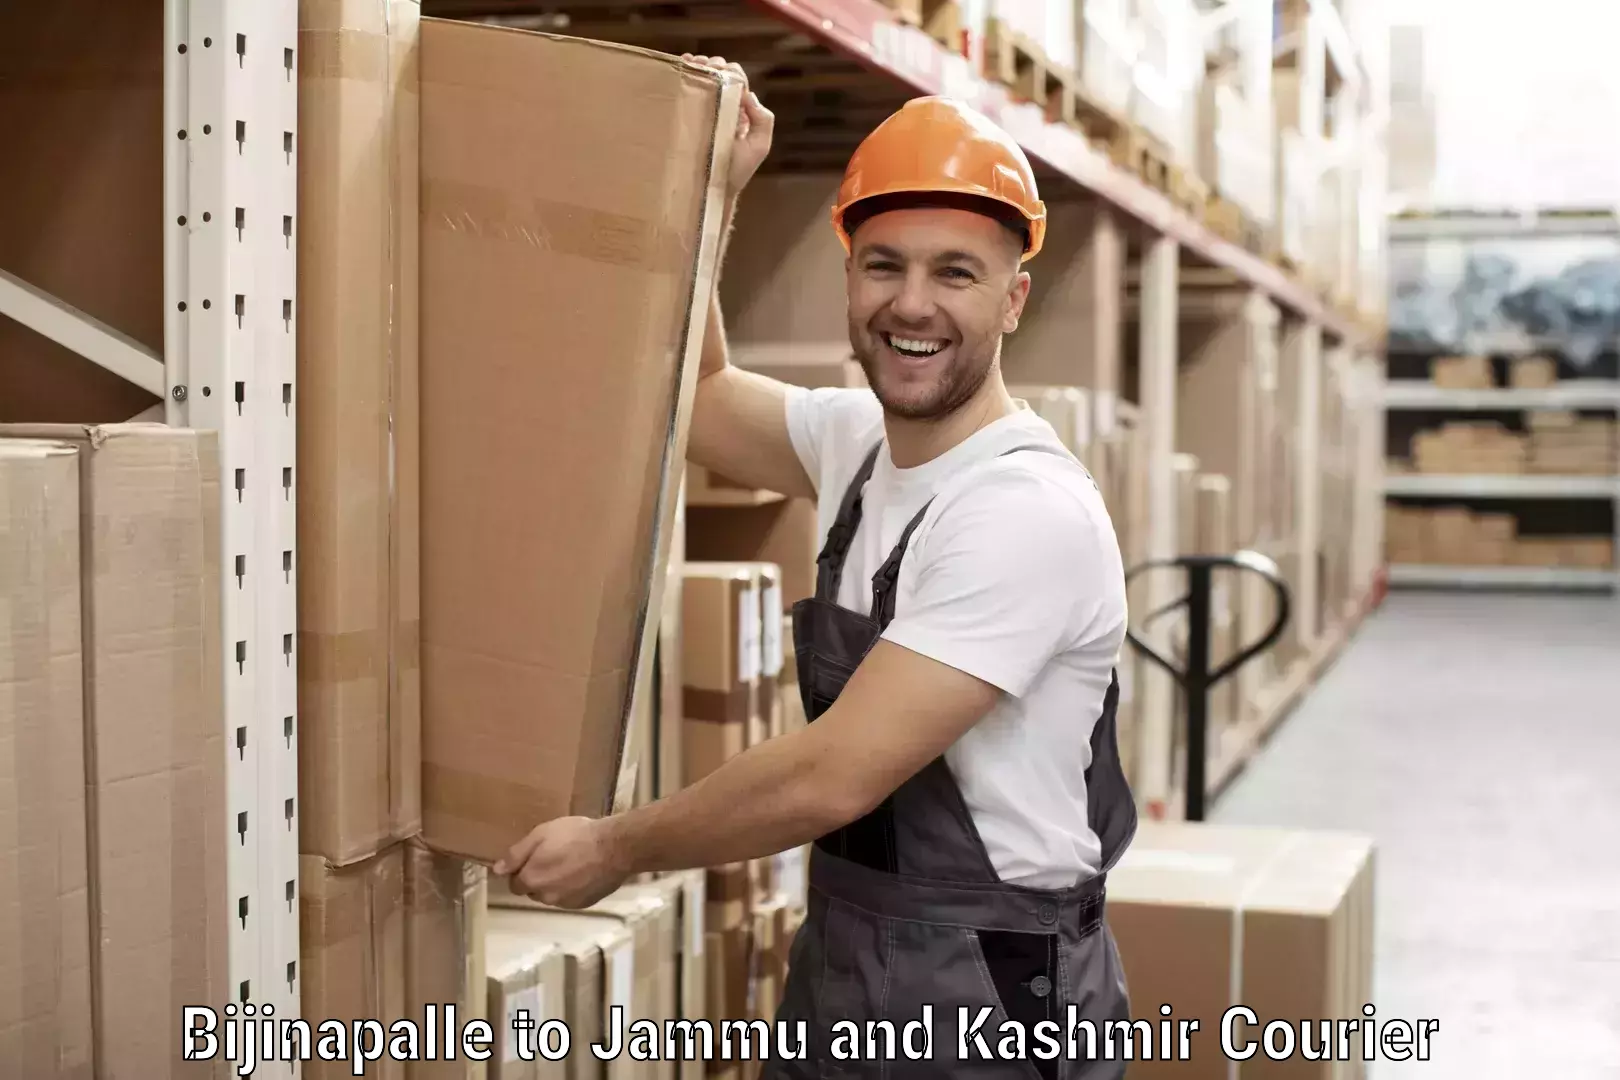 24-hour courier service Bijinapalle to Jammu and Kashmir